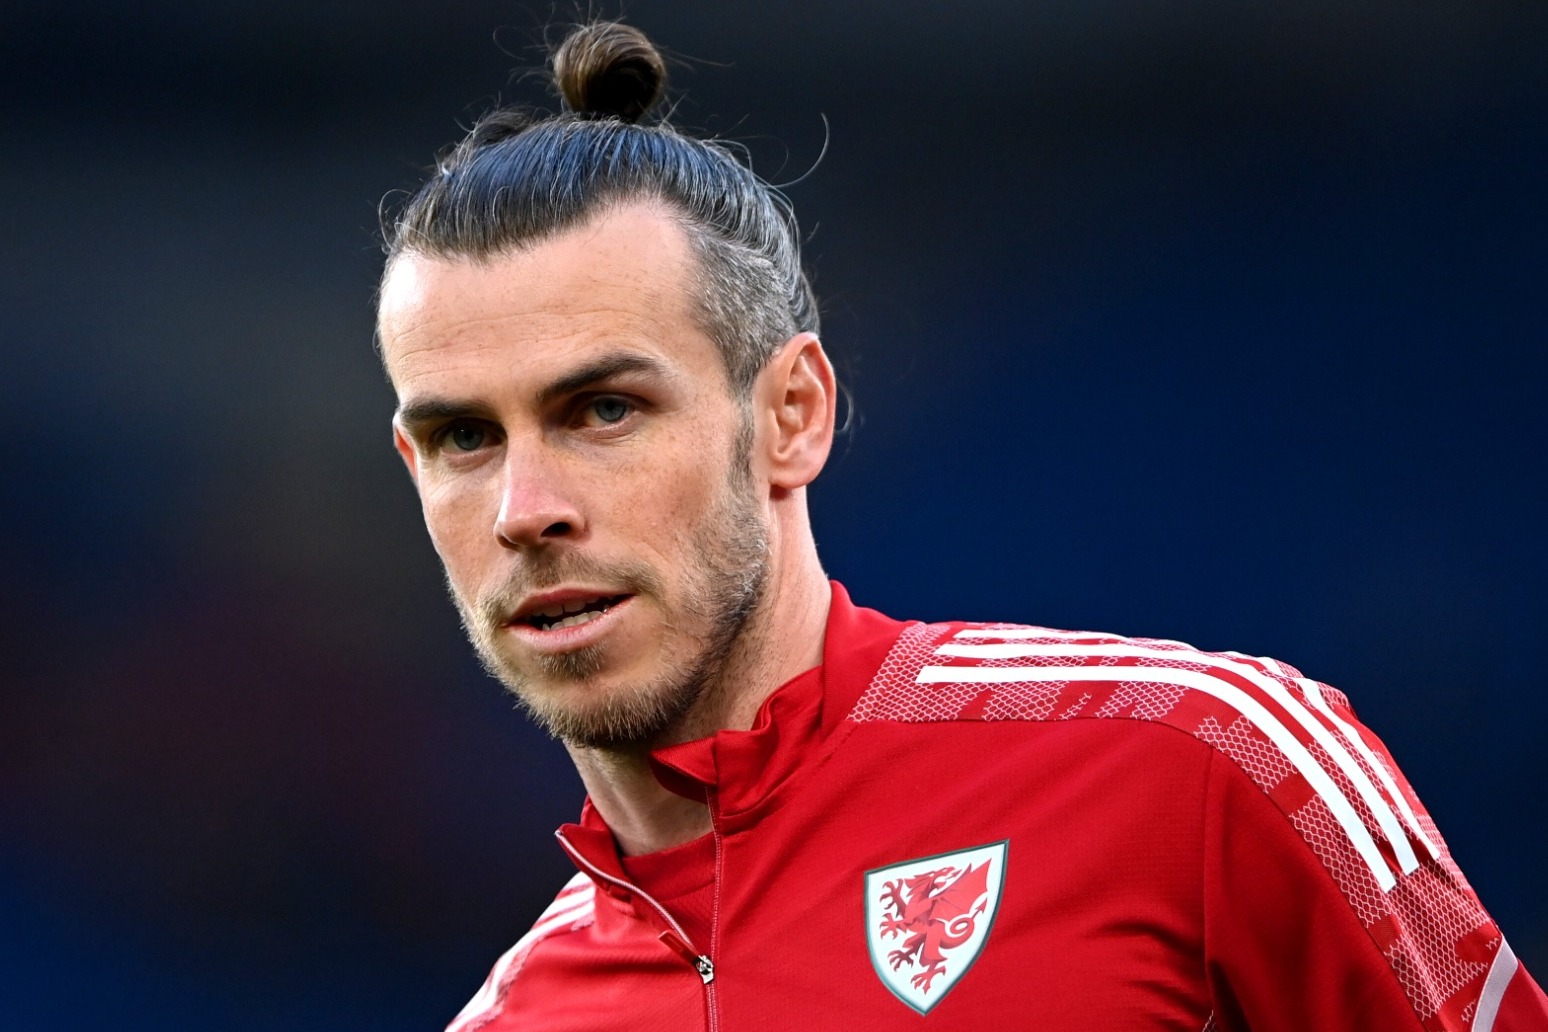 Gareth Bale in Wales squad for World Cup play-off after shrugging off back issue 